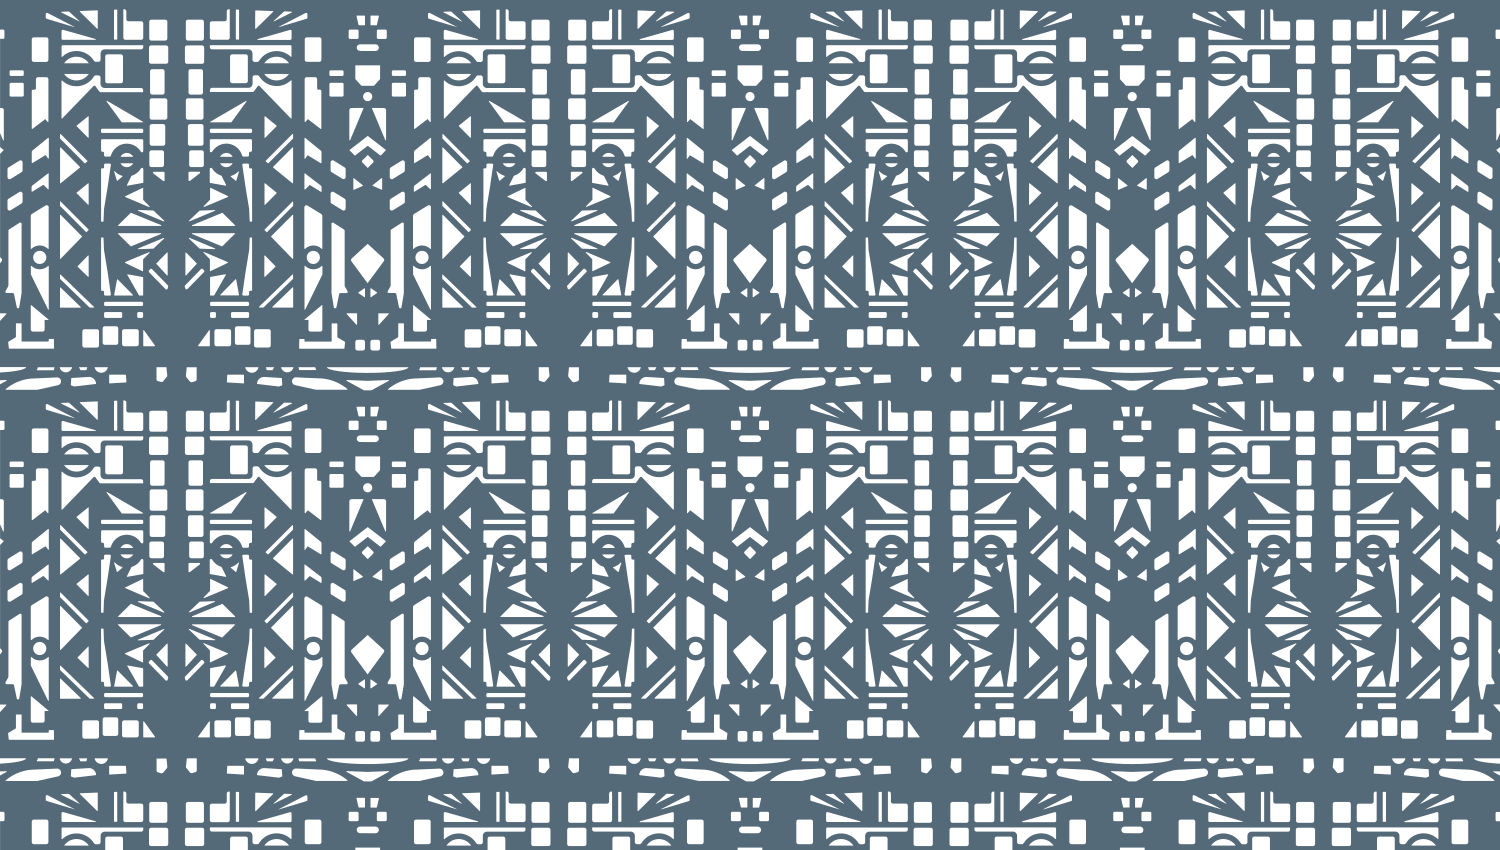 Parasoleil™ Kitty's Pattern© pattern displayed with a blue color overlay